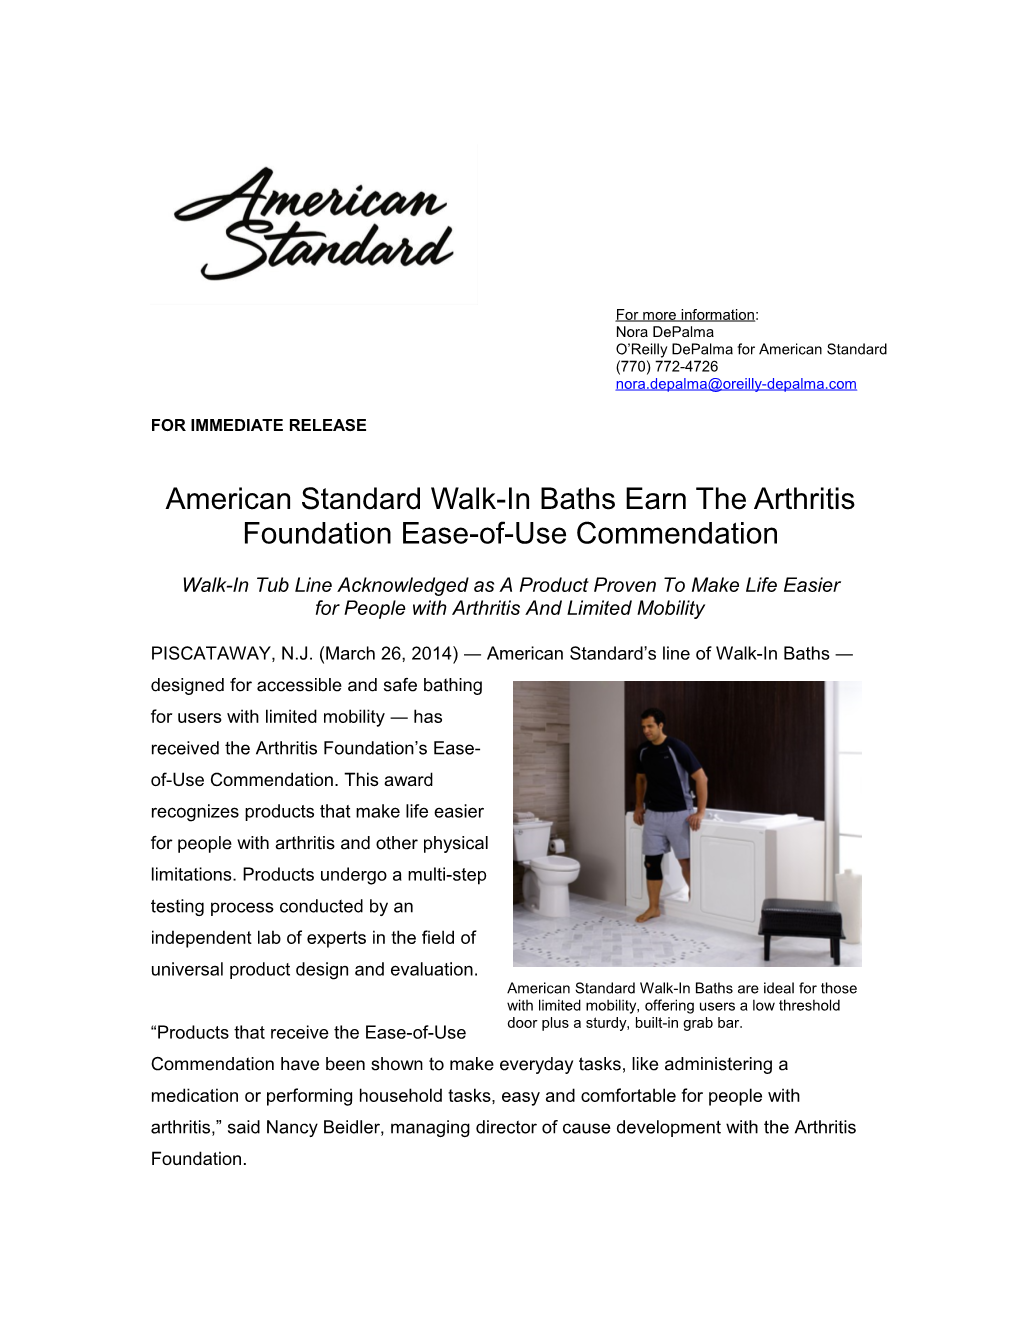 American Standard Walk-In Baths Earnthe Arthritis Foundation Ease-Of-Use Commendation3-3-3